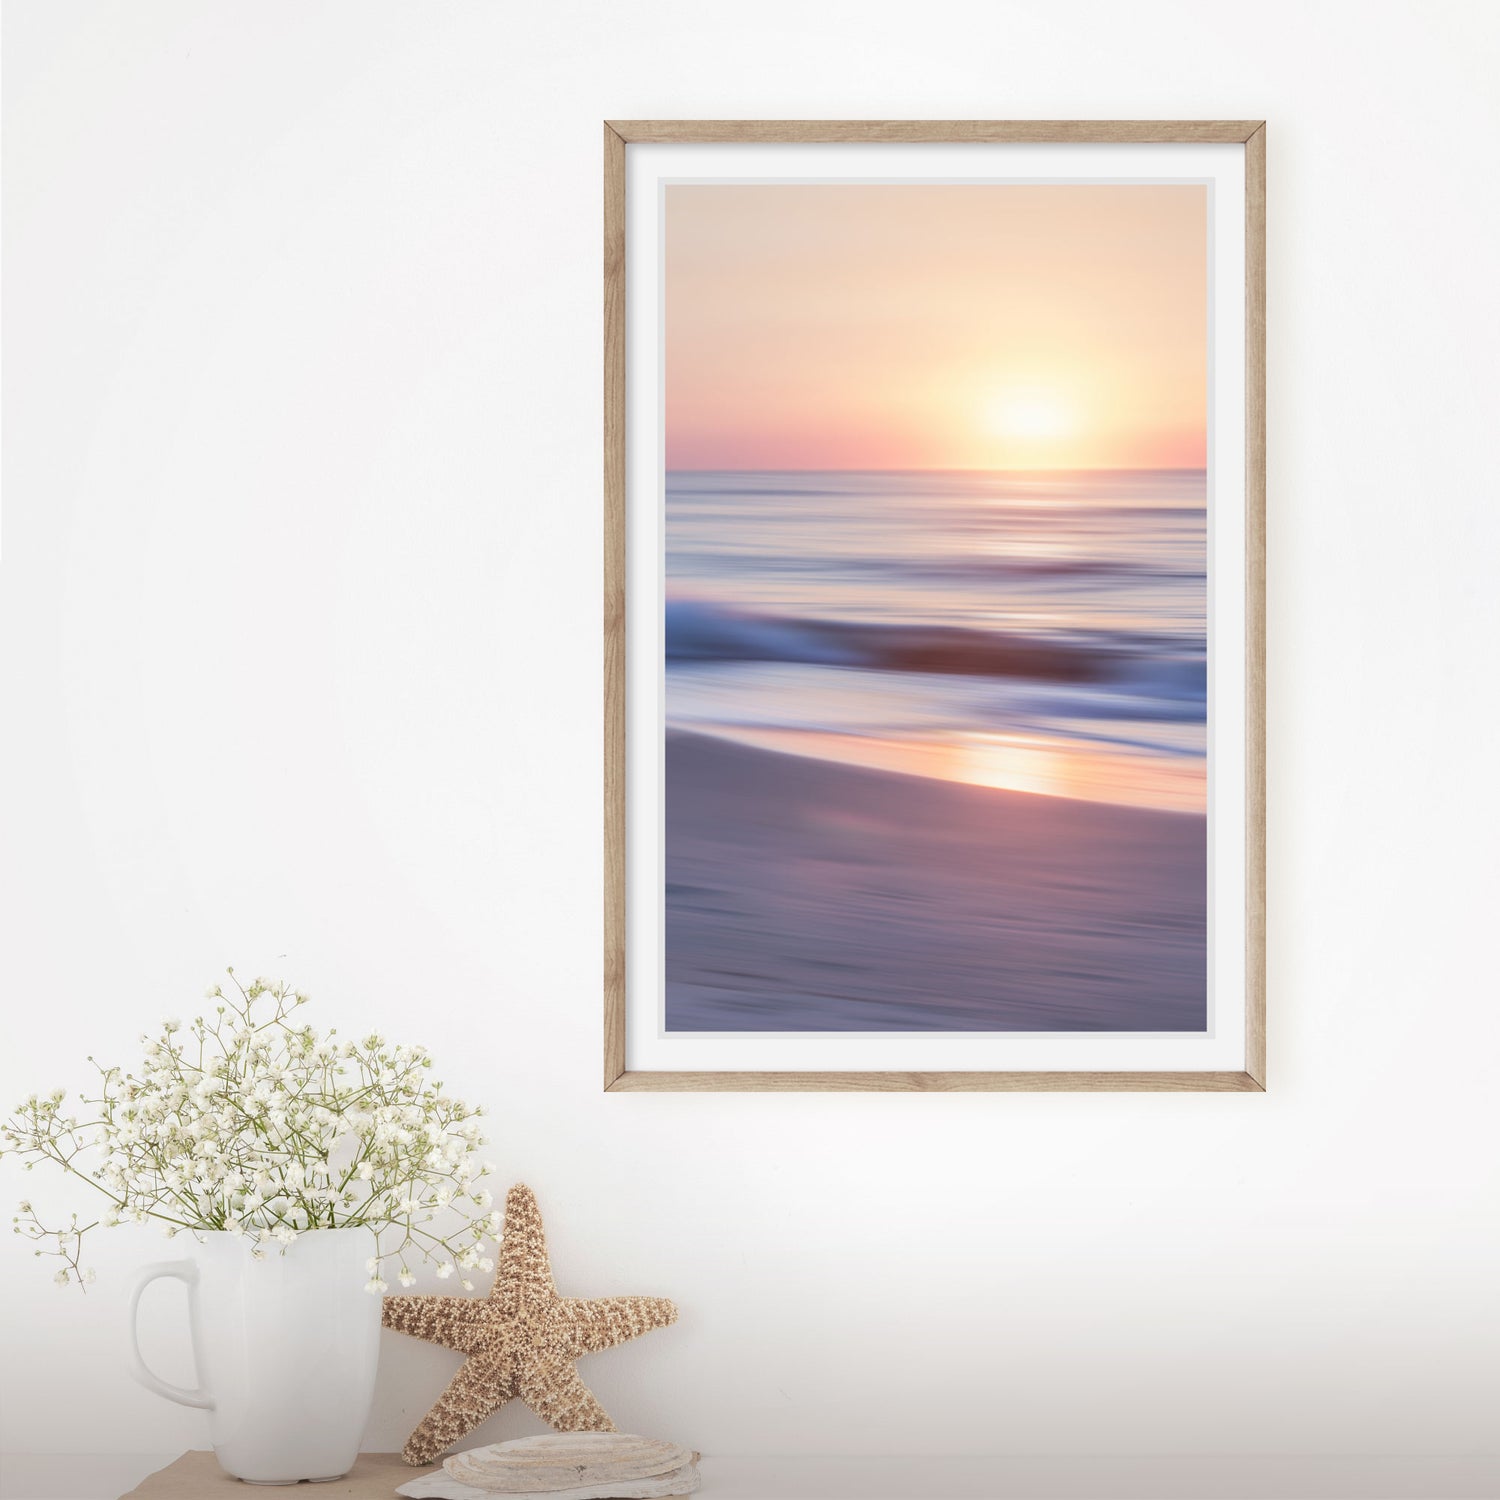 Modern wall art featuring gently rolling waves at sunrise, creating tranquility.